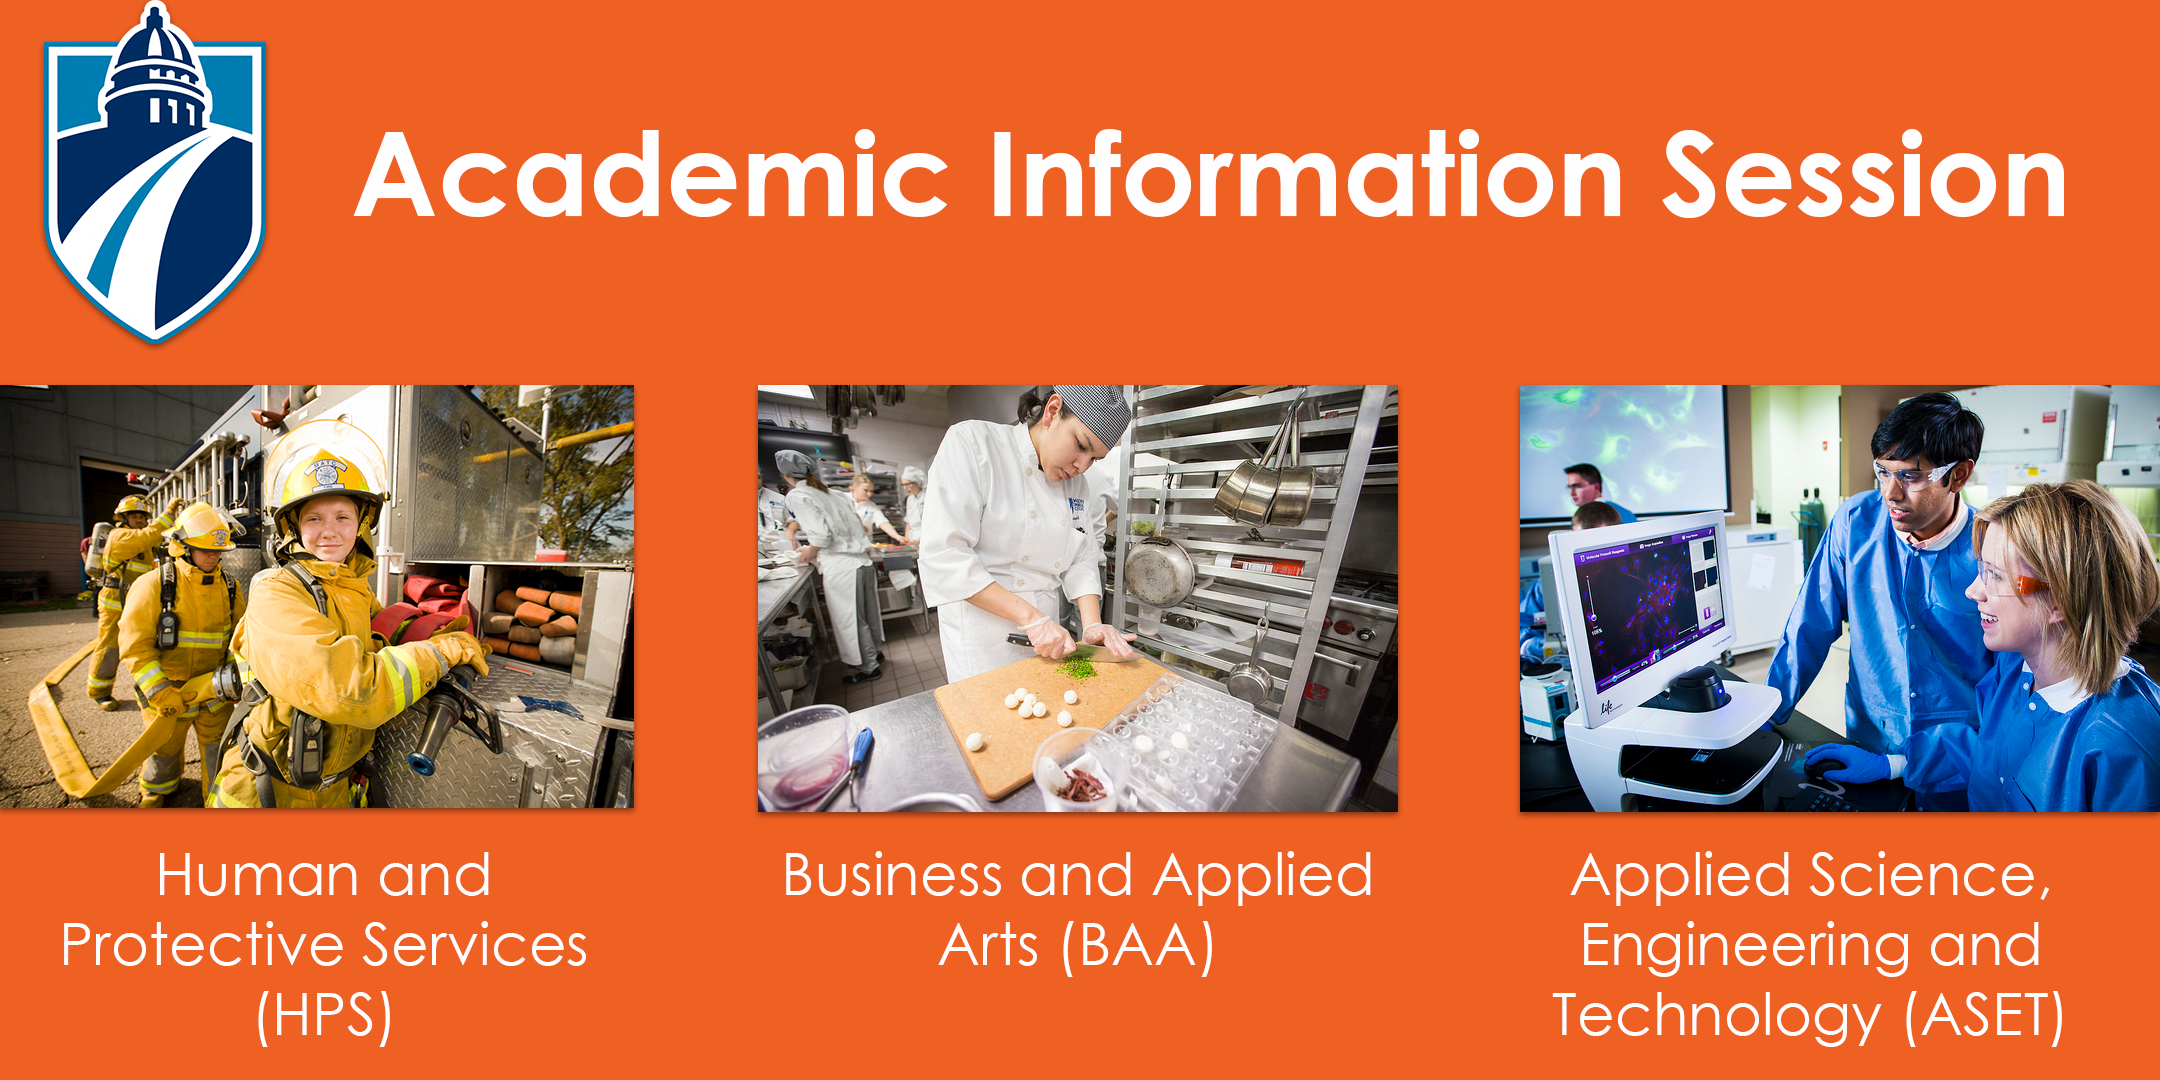 Business, Human & Protective Services (HPS) AND Applied Science, Engineering & Technology (ASET) Academic Information Session